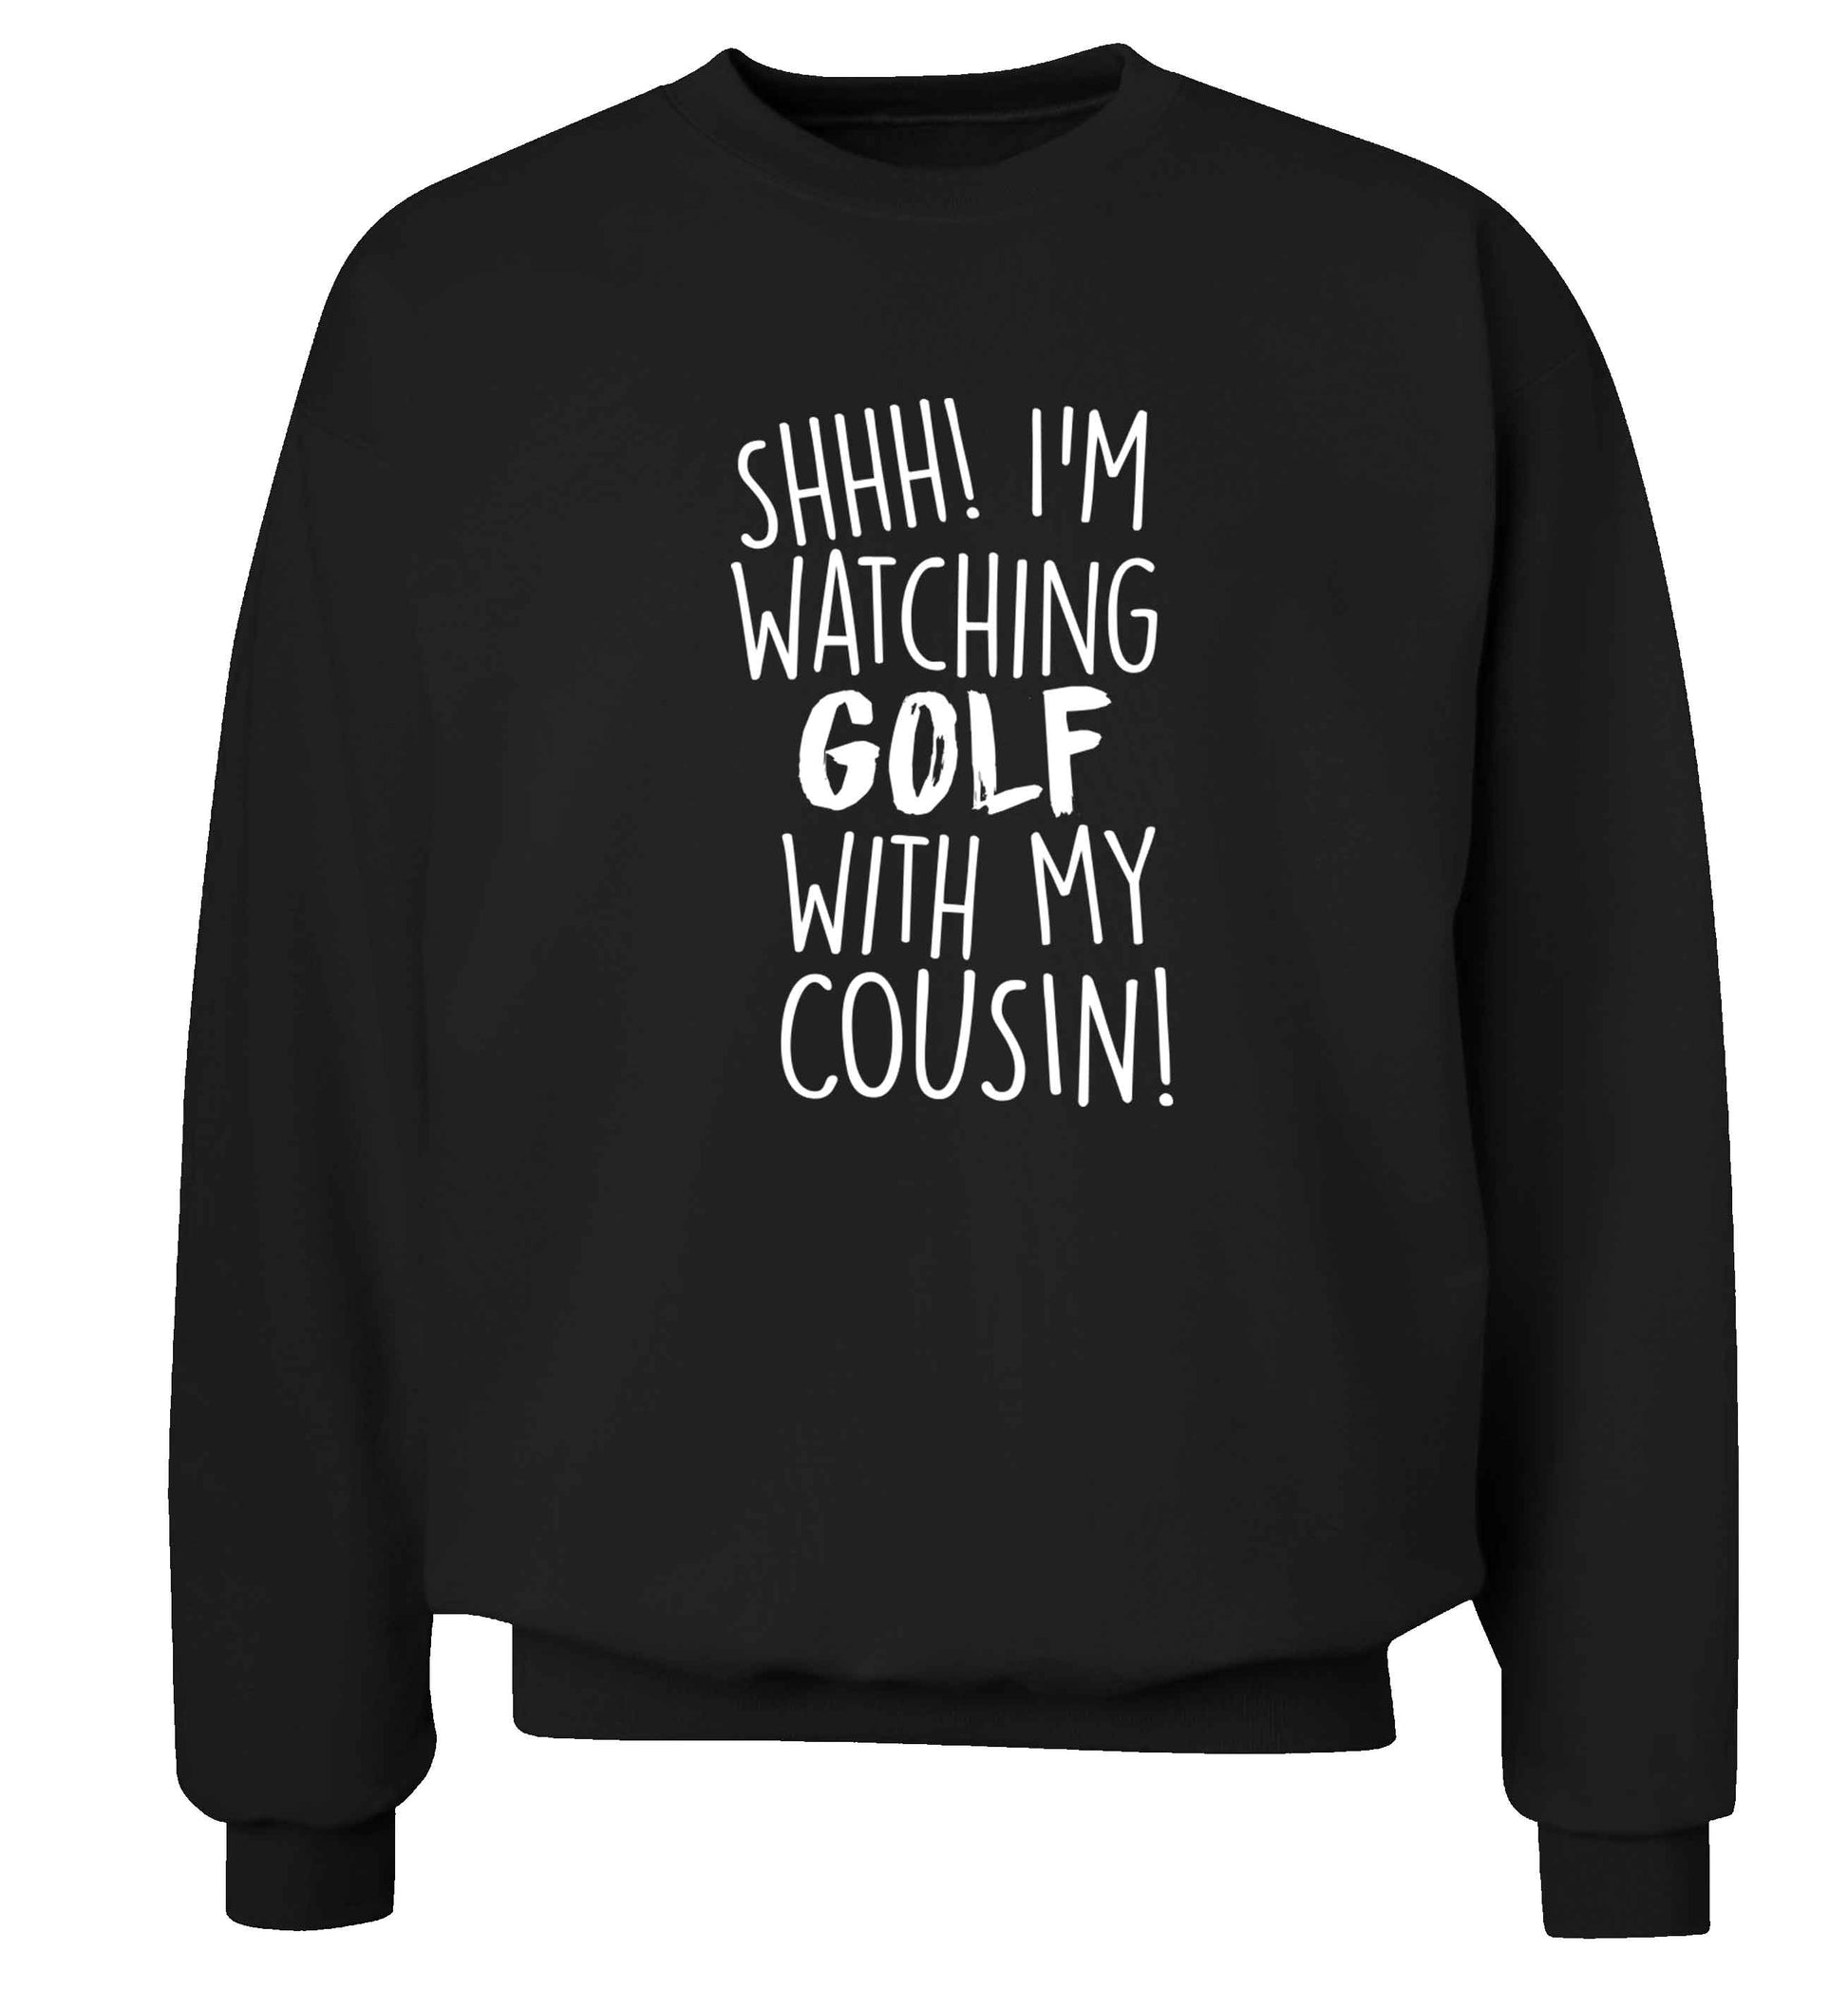 Shh I'm watching golf with my cousin Adult's unisex black Sweater 2XL